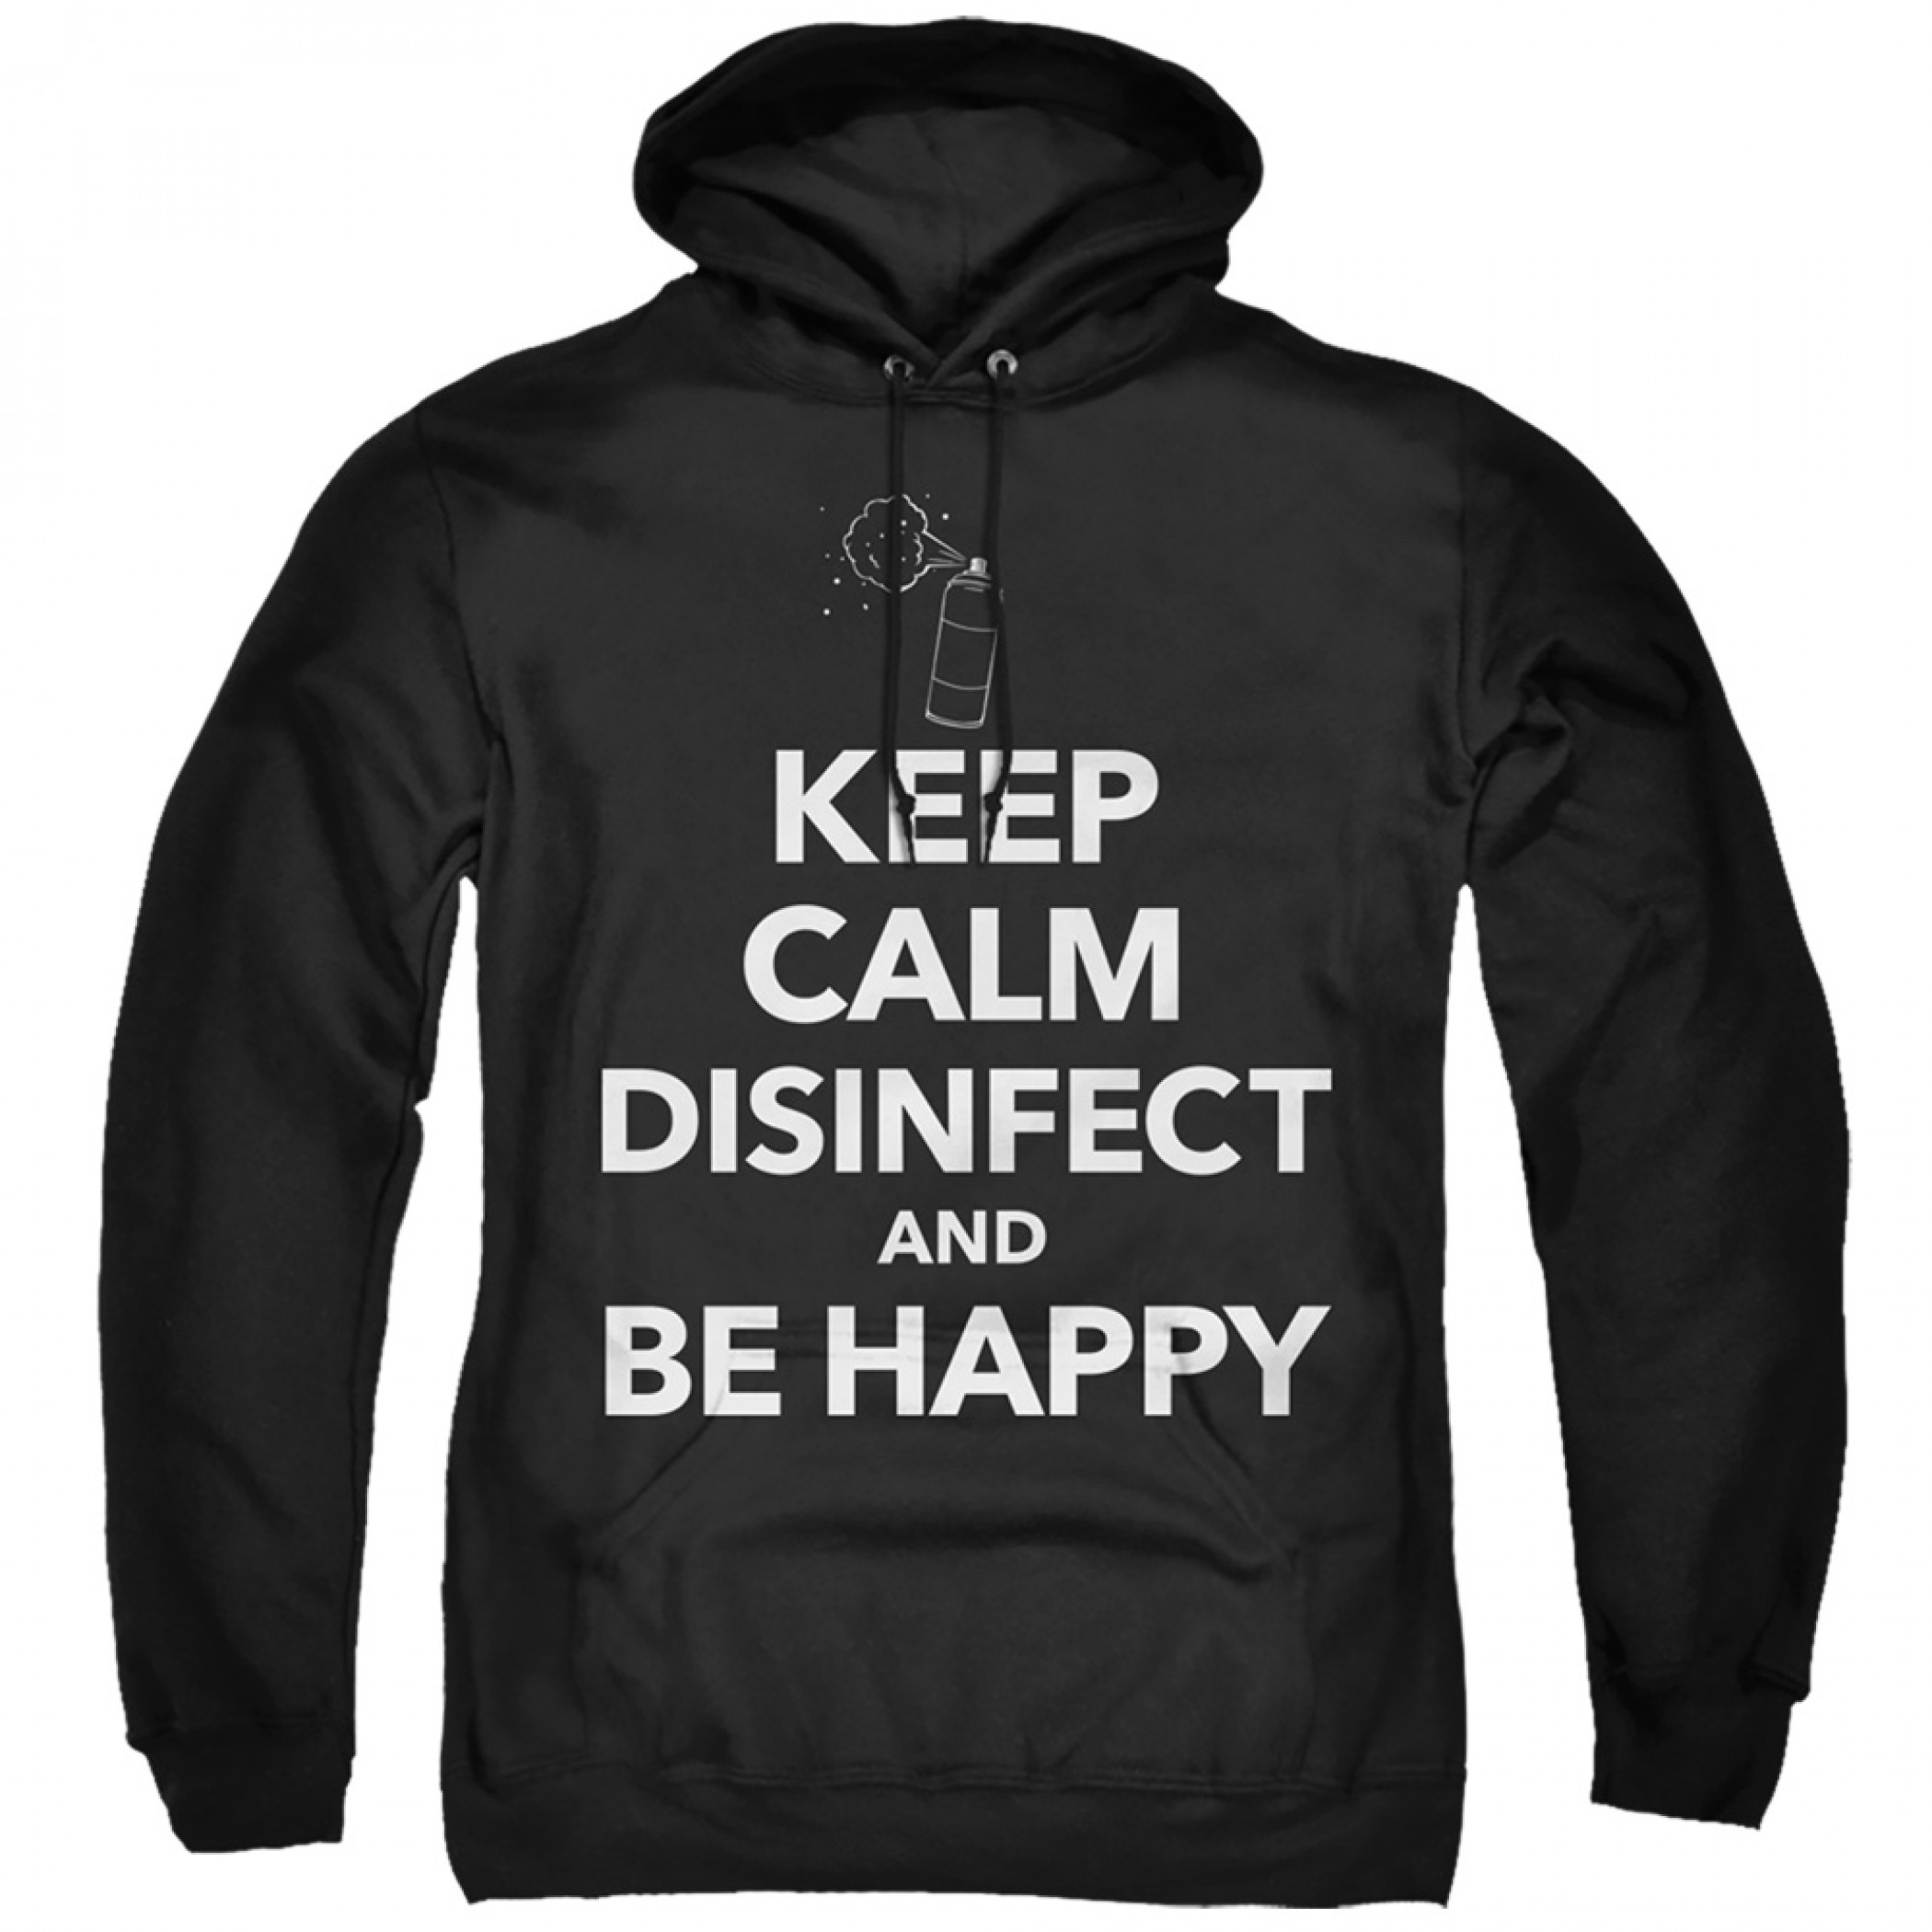 Keep Calm and Disinfect Social Distancing Hoodie